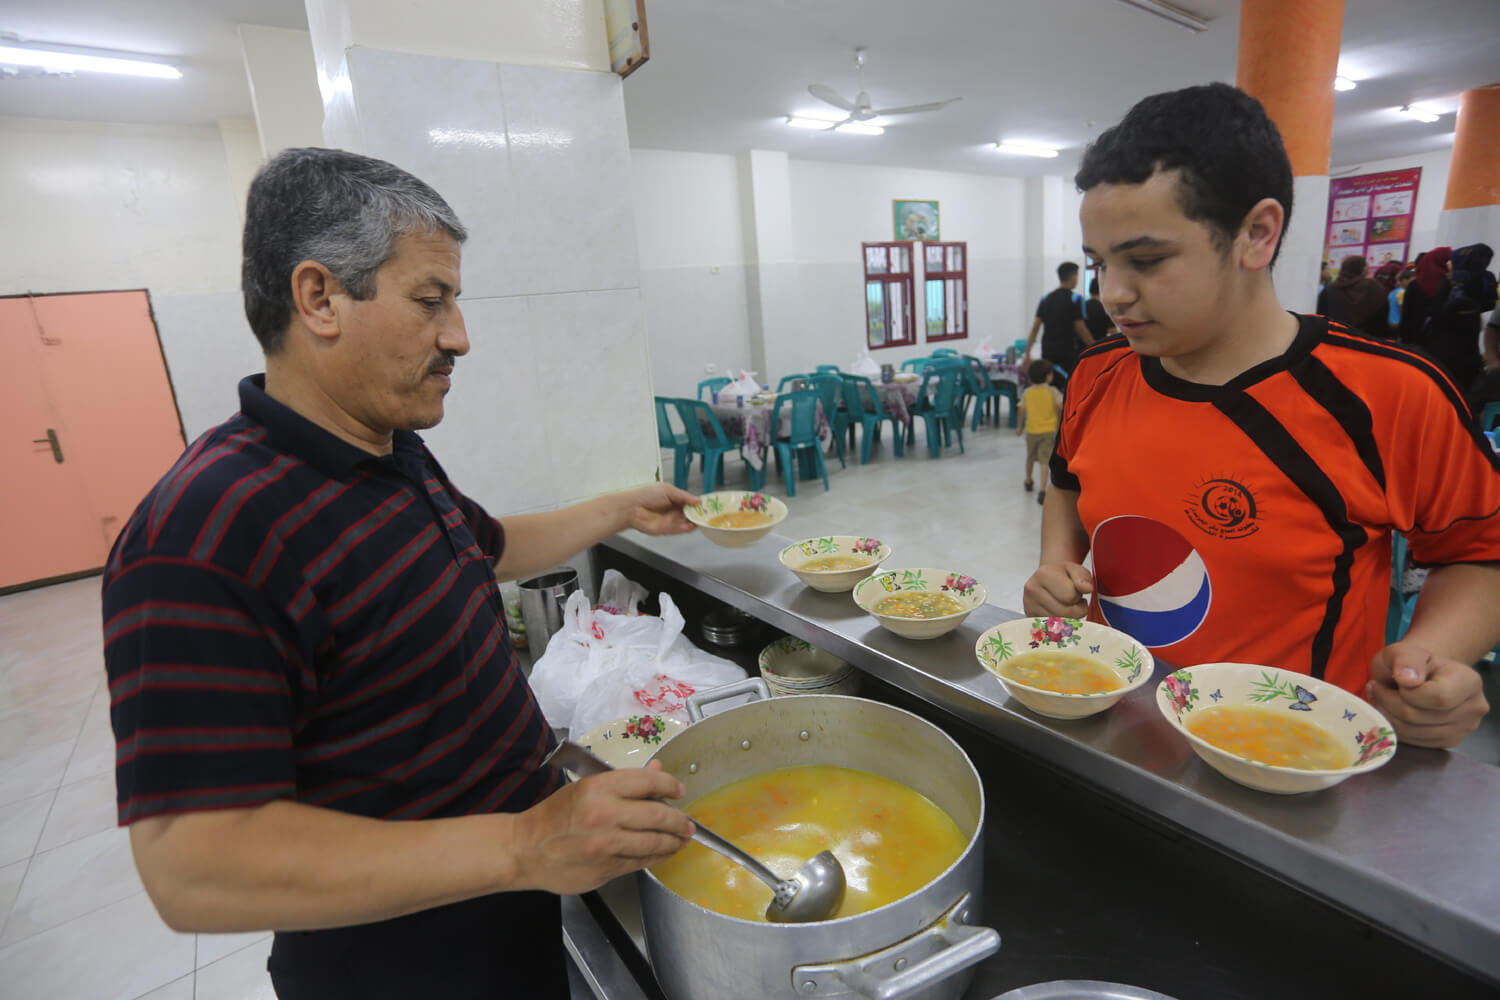 Ahmad Harb, 13, receives a meal from the cook at the Al-Amal Institute for Orphans, June 26, 2016. (Photo: Mohammed Asad)